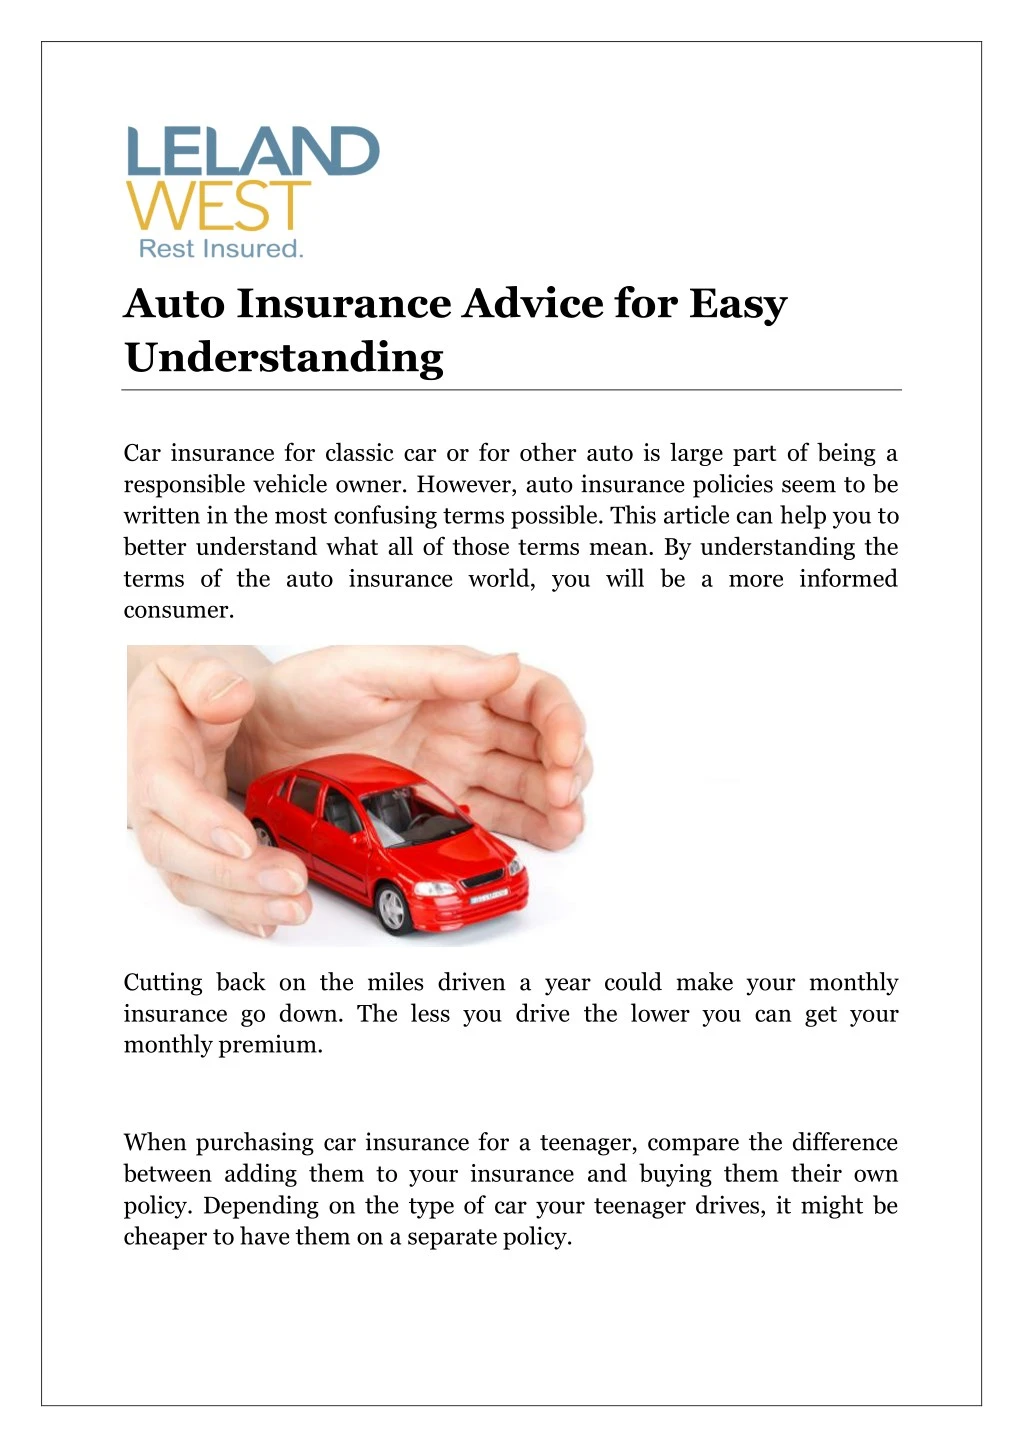 auto insurance advice for easy understanding